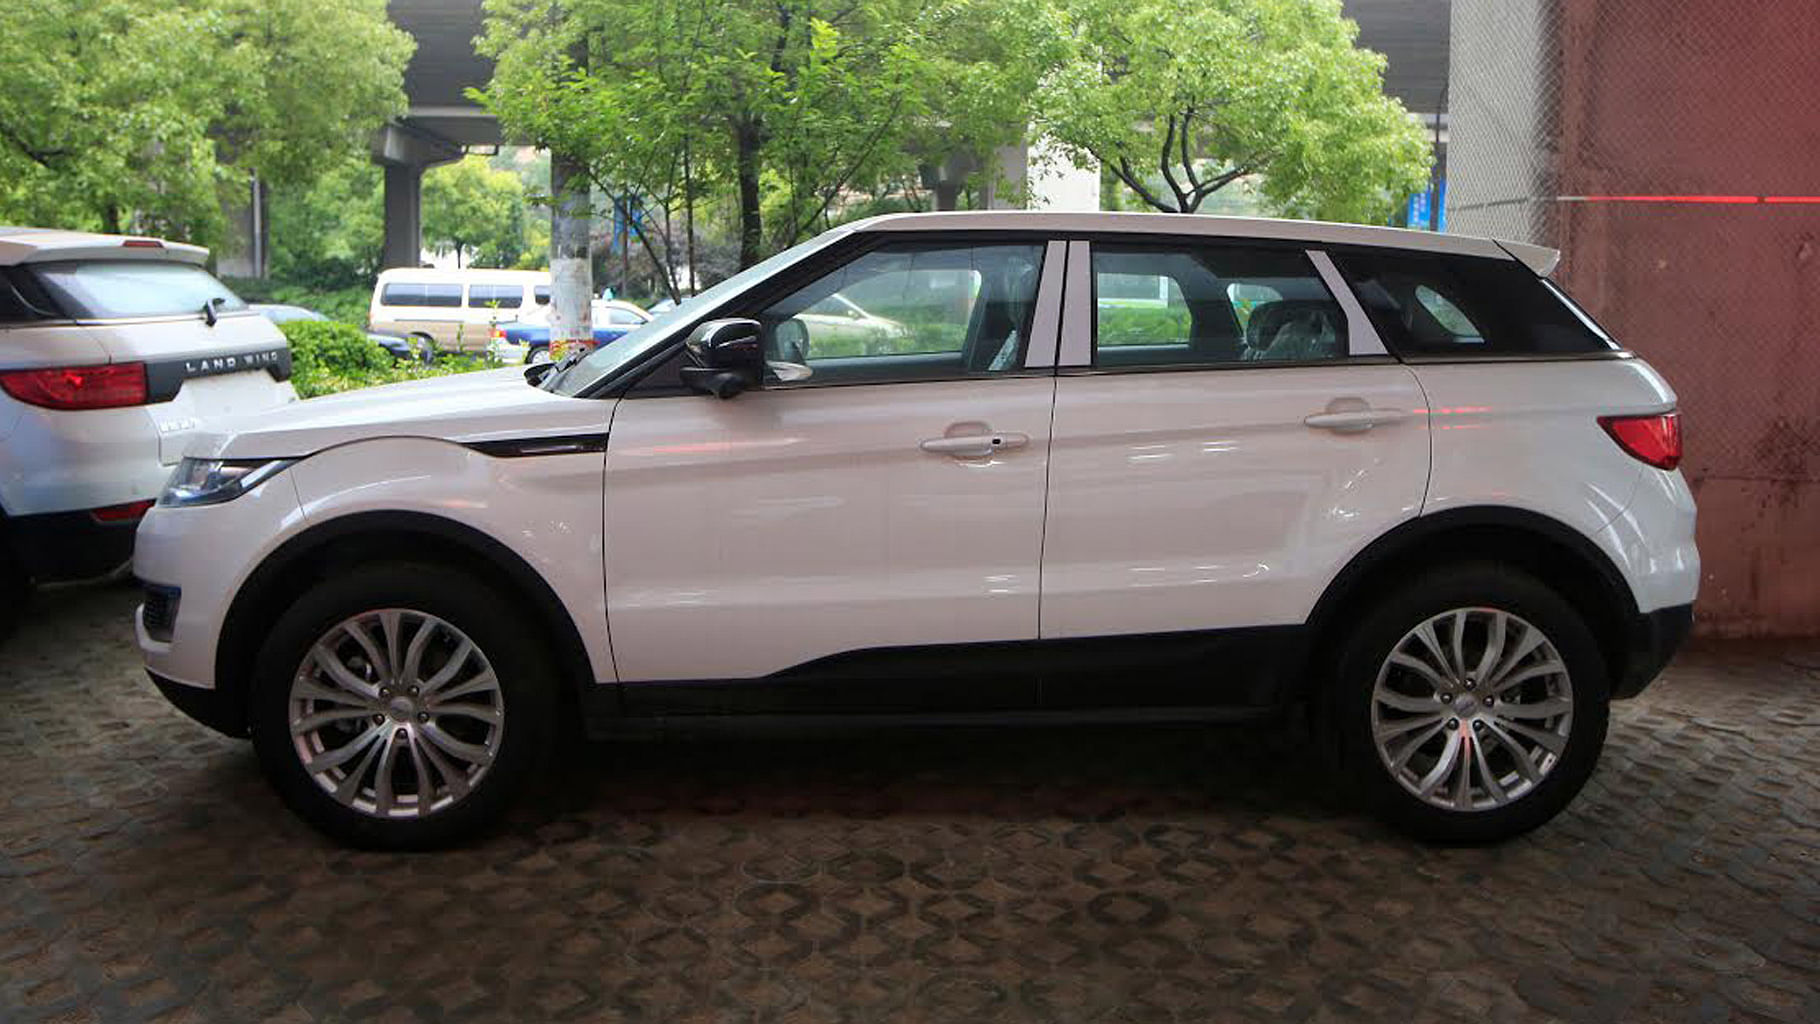 Jiangling Motor’s Landwind x7 which being criticised for its similarities to Range Rover Evoque. (Photo: Reuters)